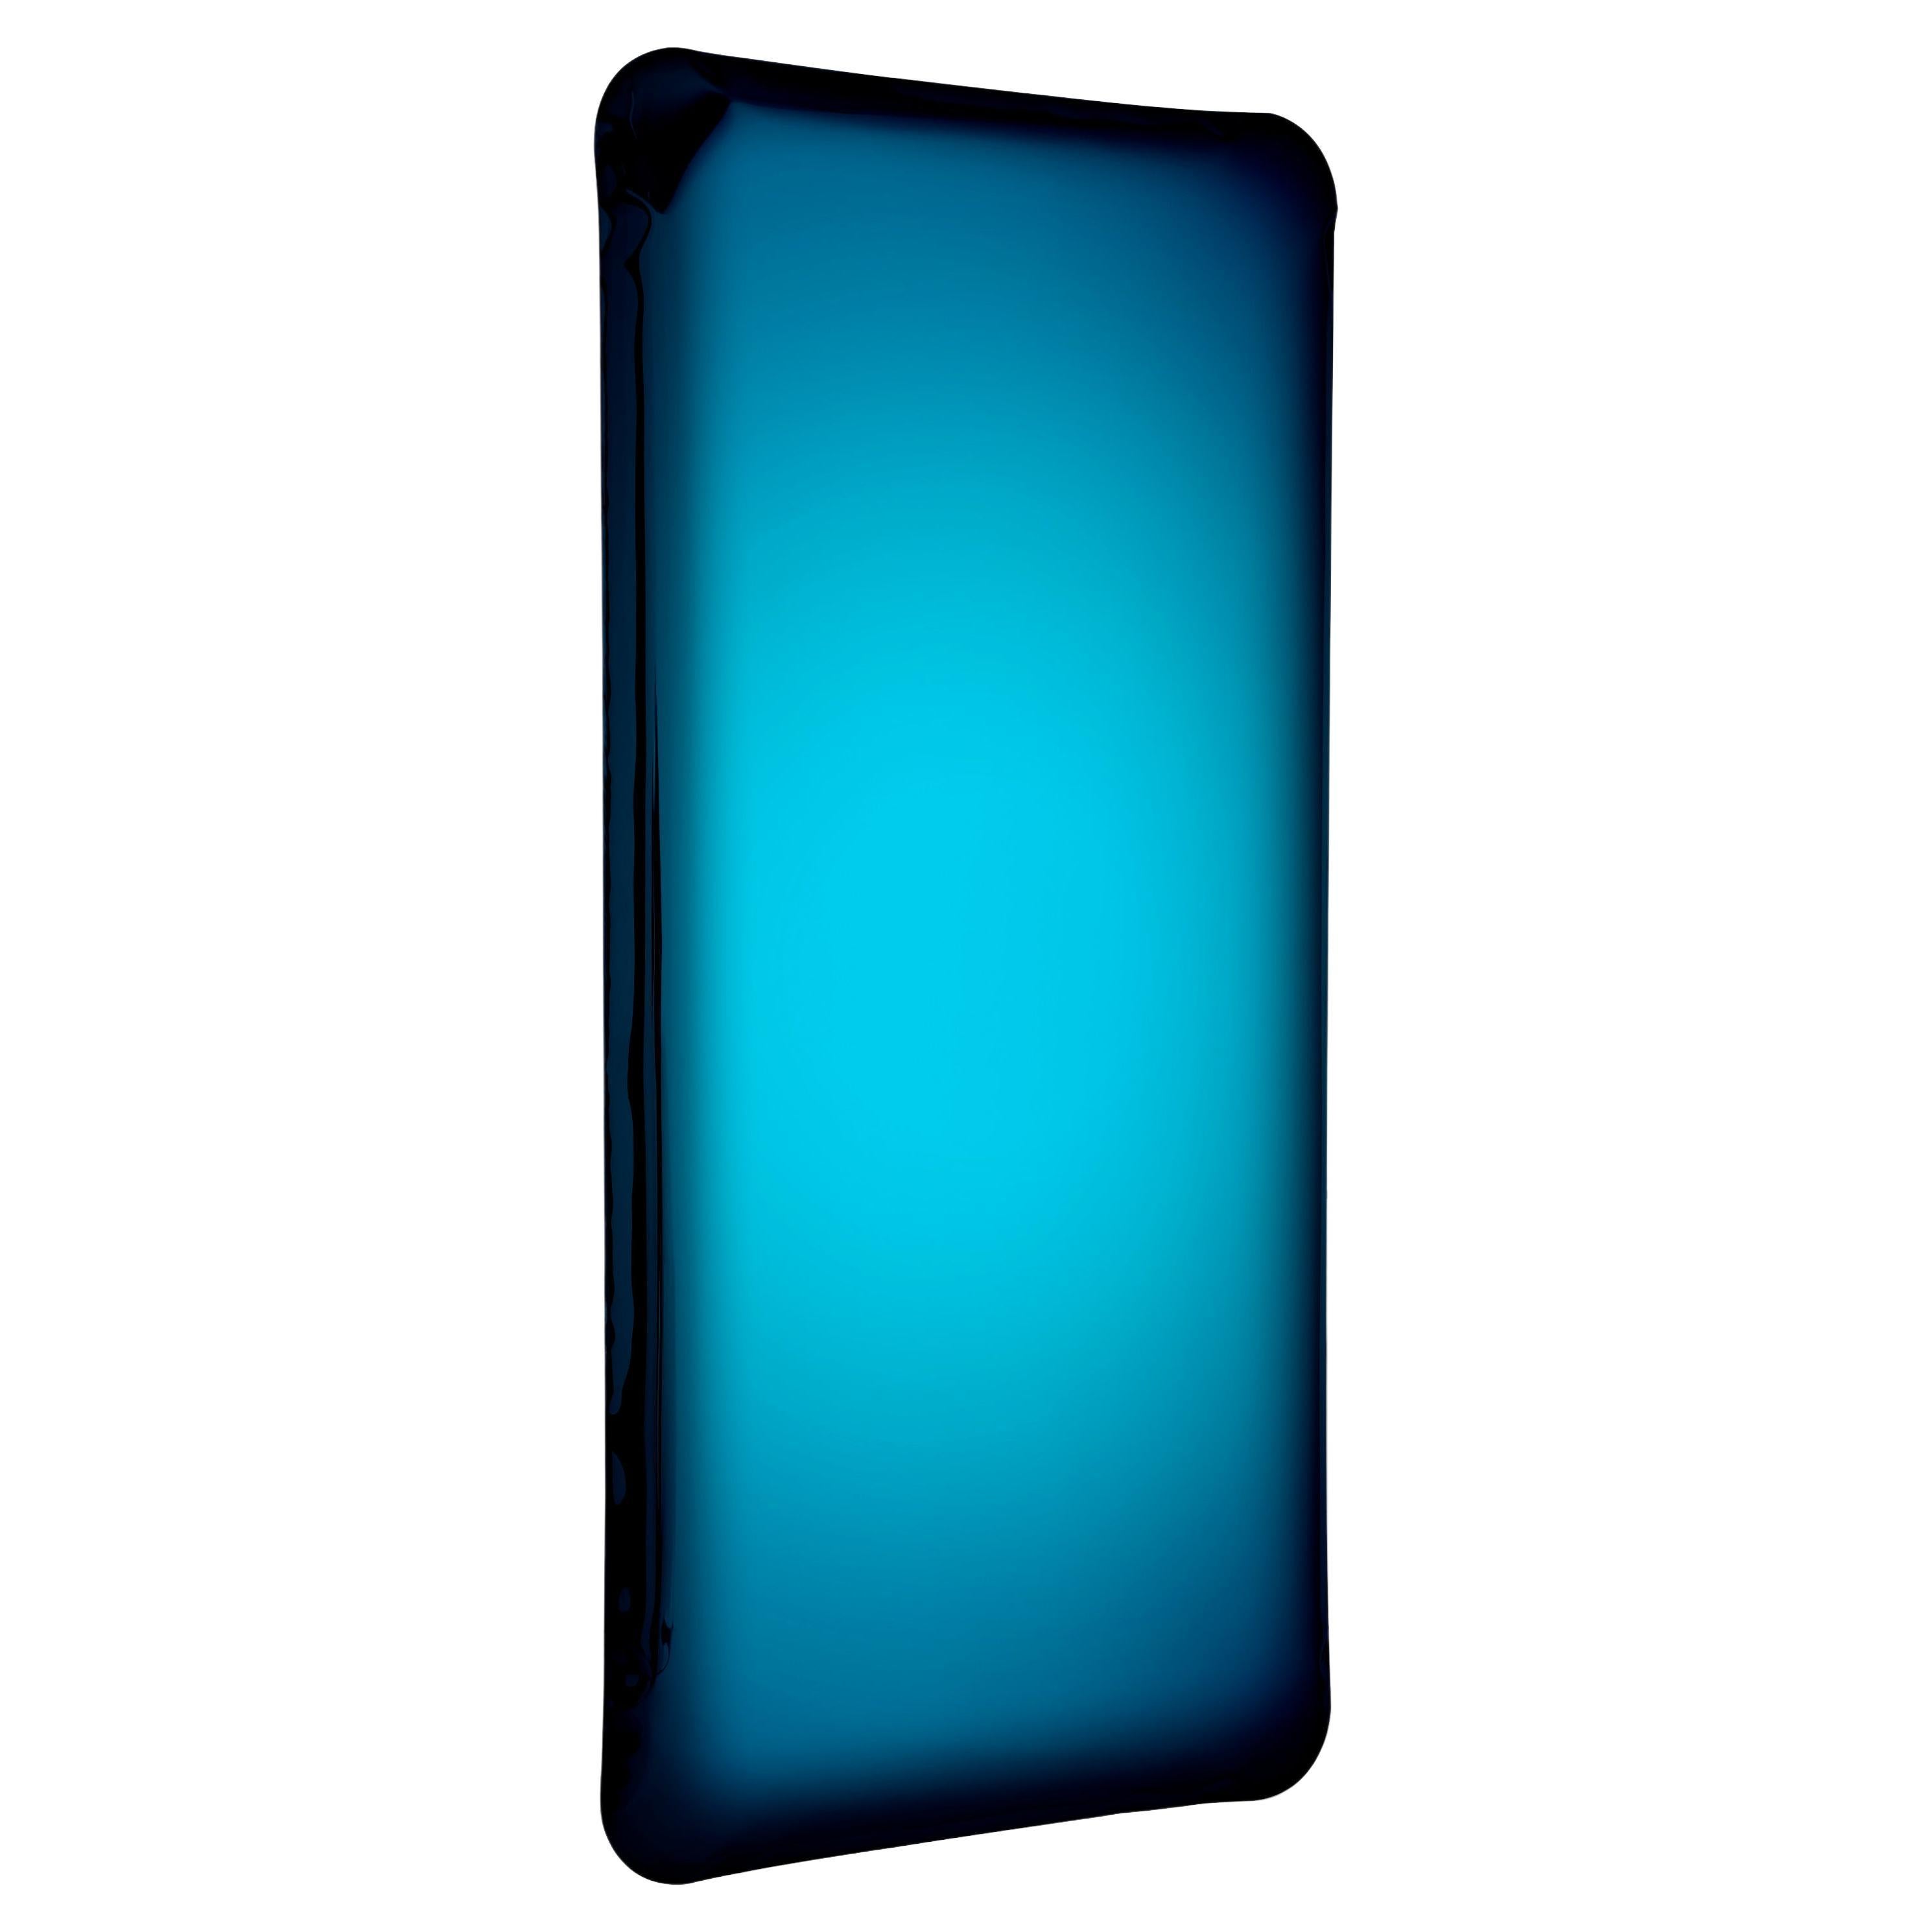 Tafla Q2 Polished Deep Space Blue Color Stainless Steel Wall Mirror by Zieta